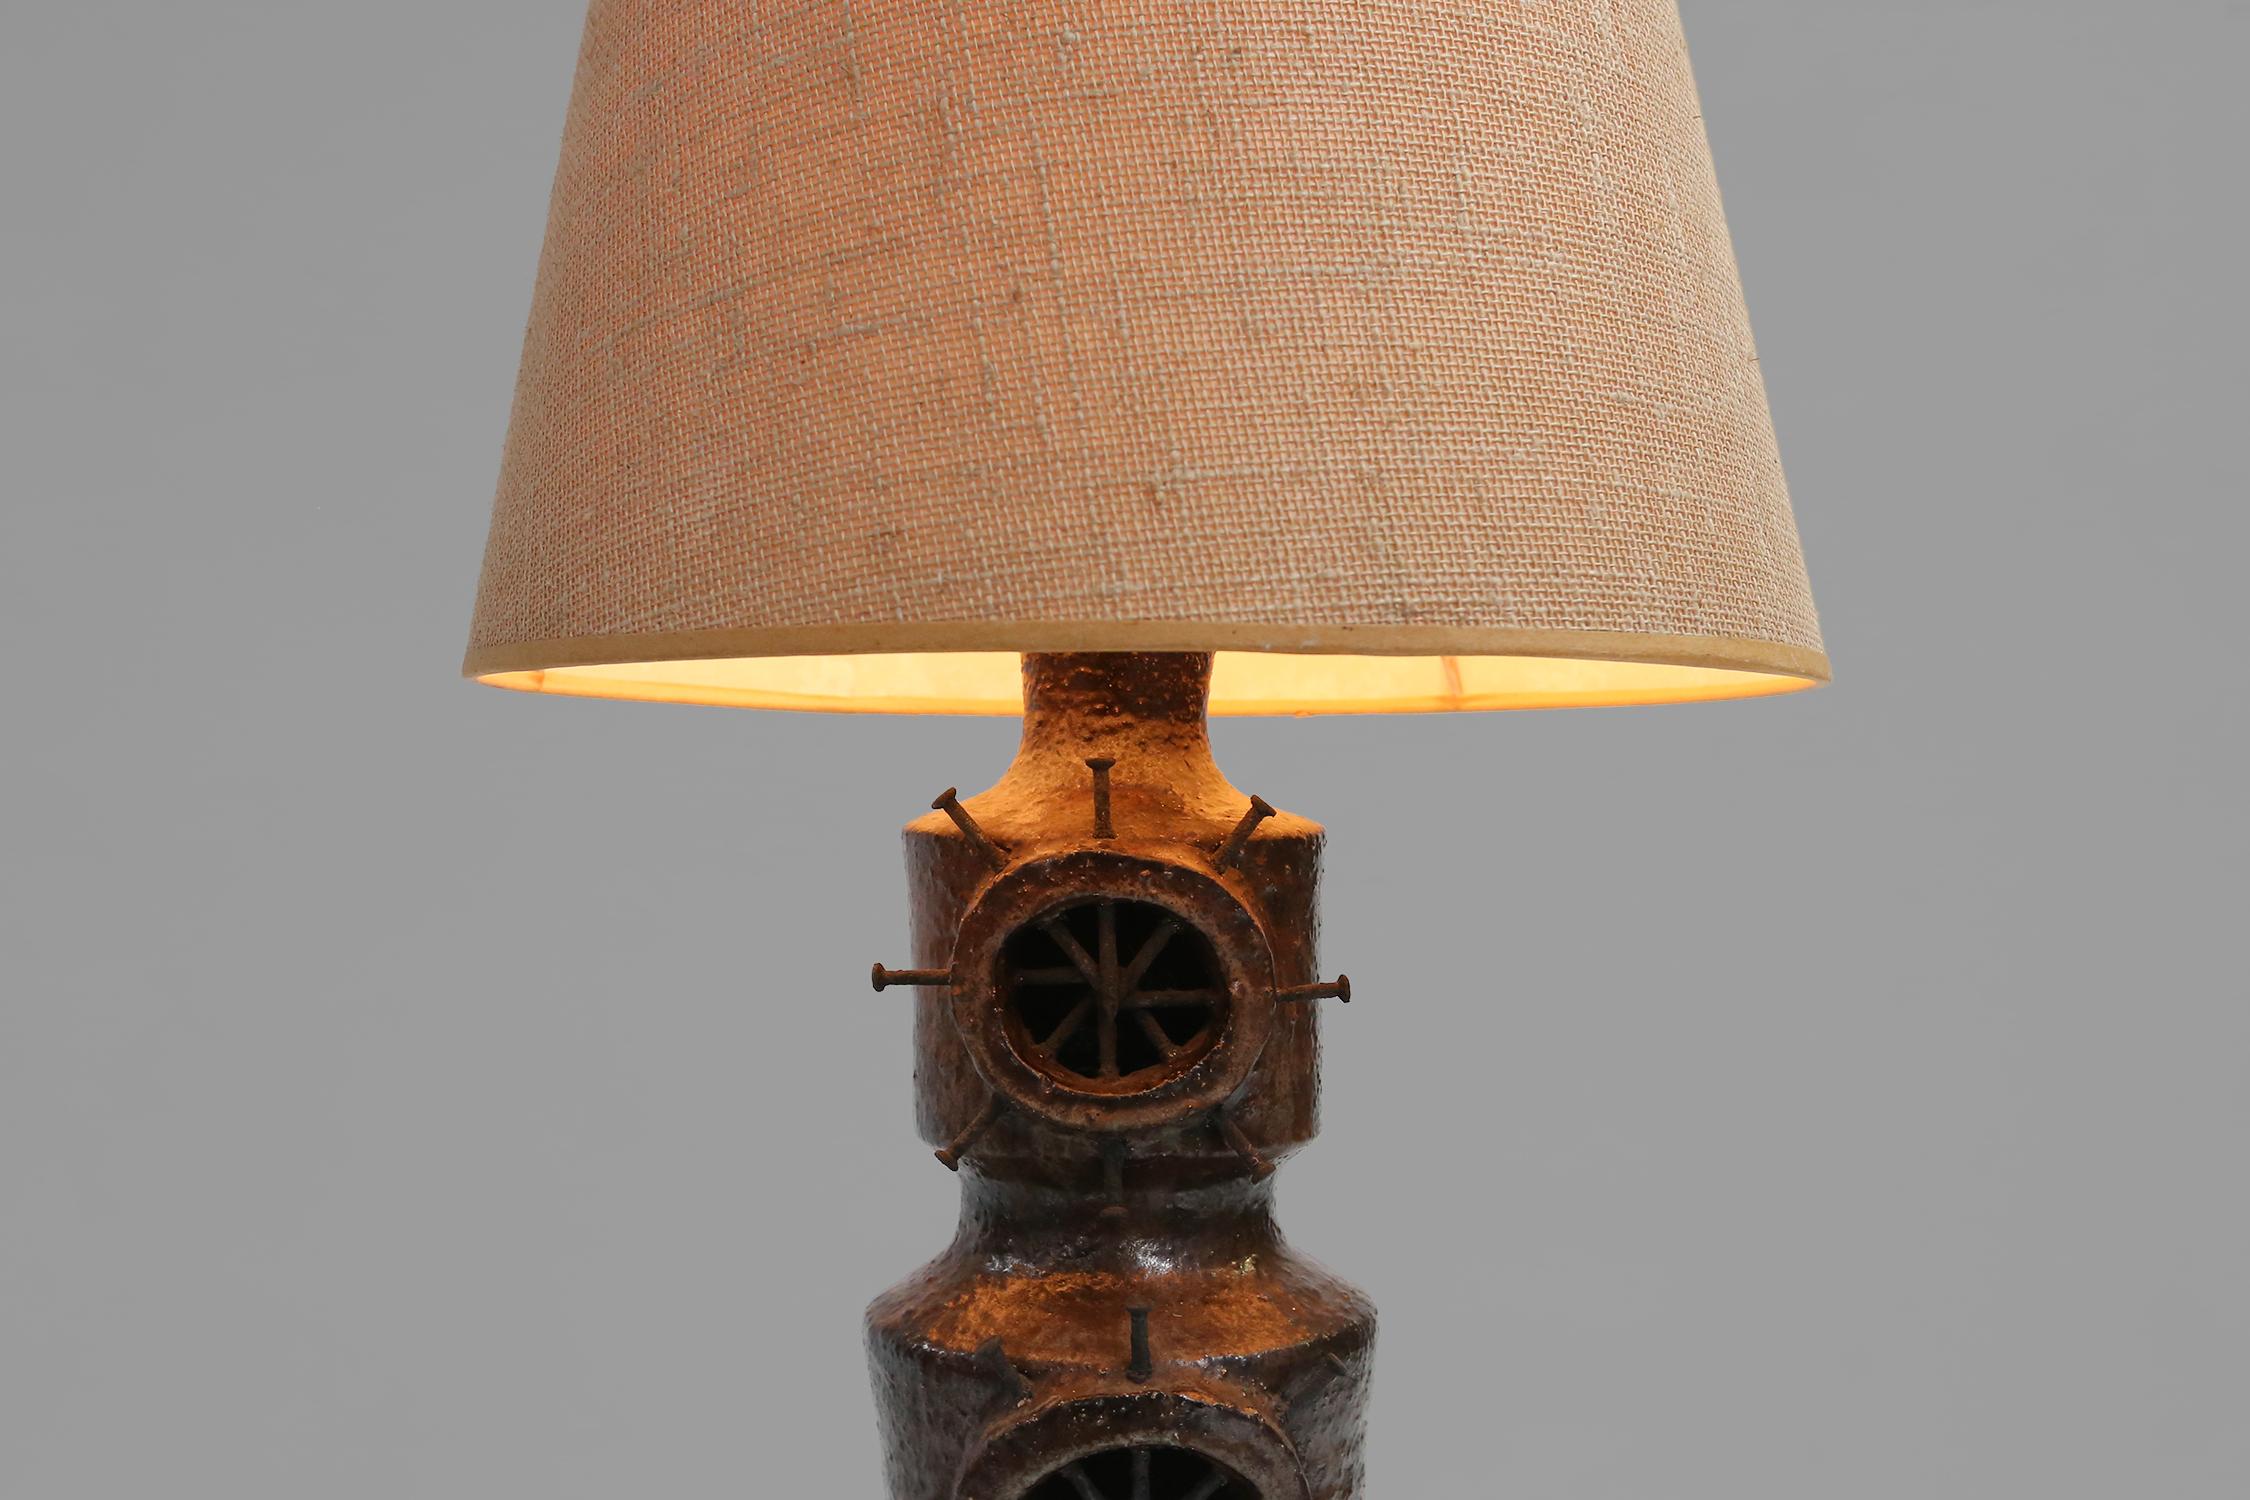 Belgian brutalist lamp made of ceramic and nails made in the 1960s.